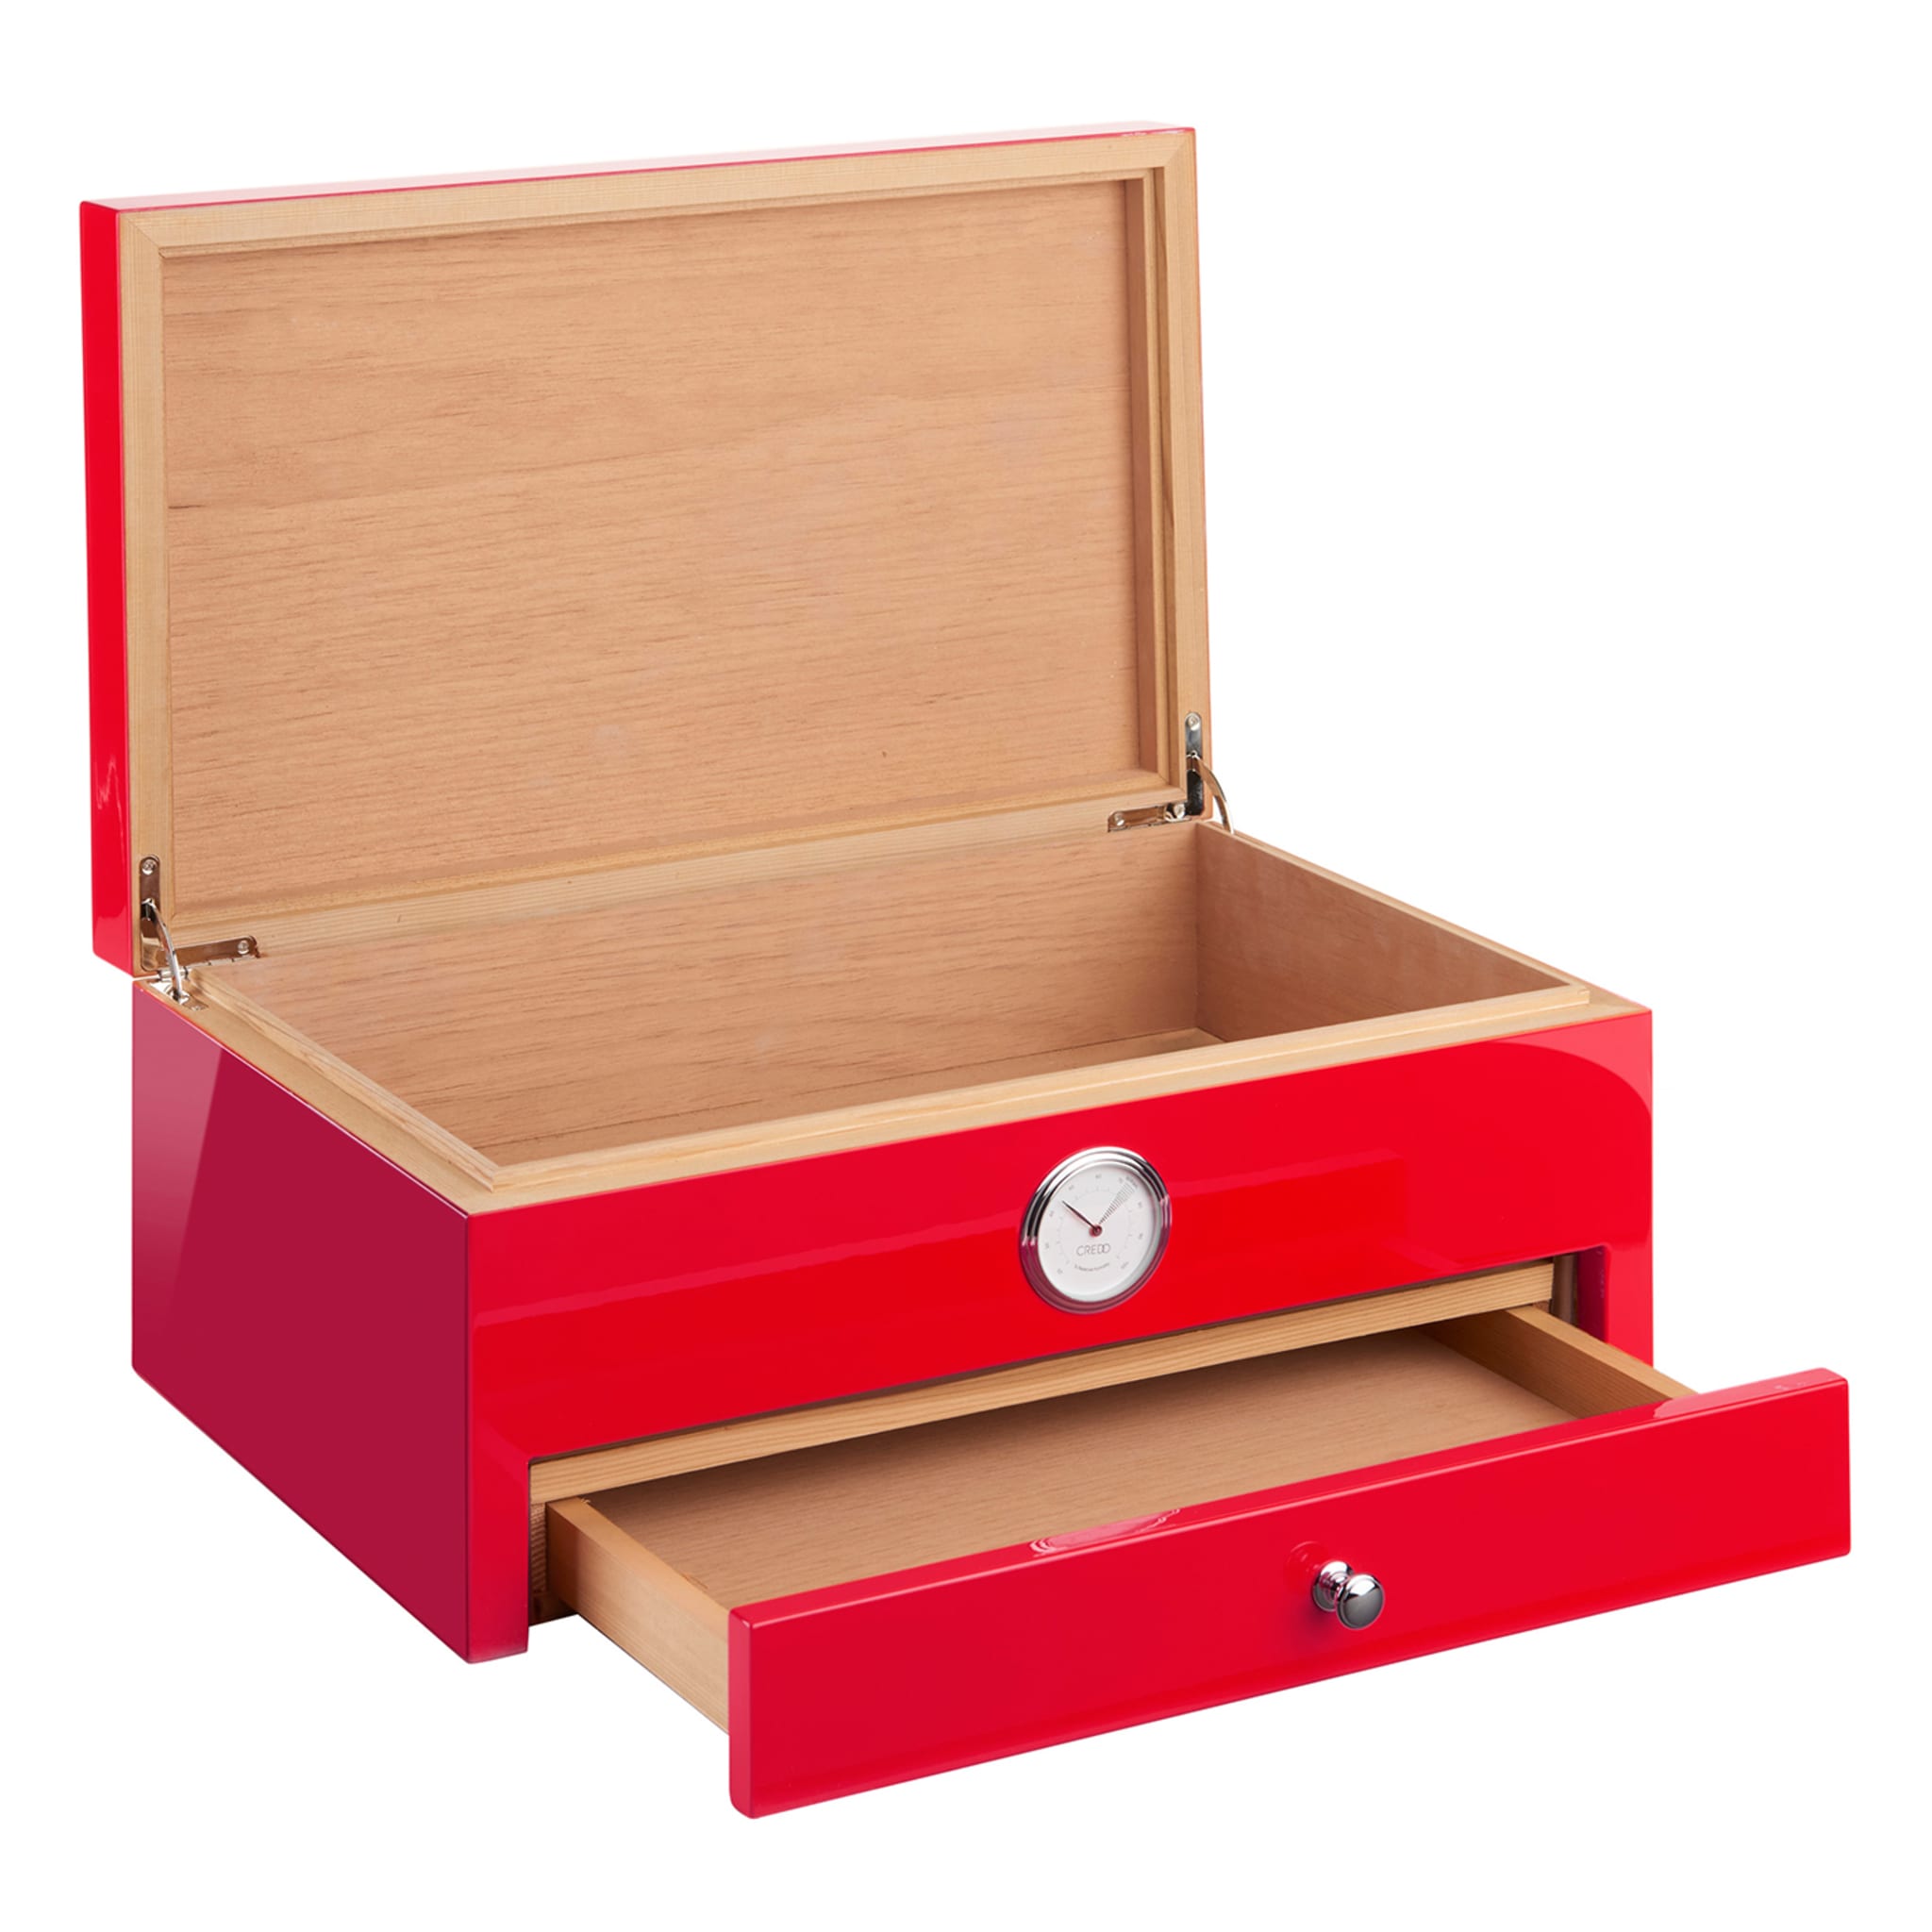 Cuba-inspired Red Humidor (Special Club Edition)  - Alternative view 1